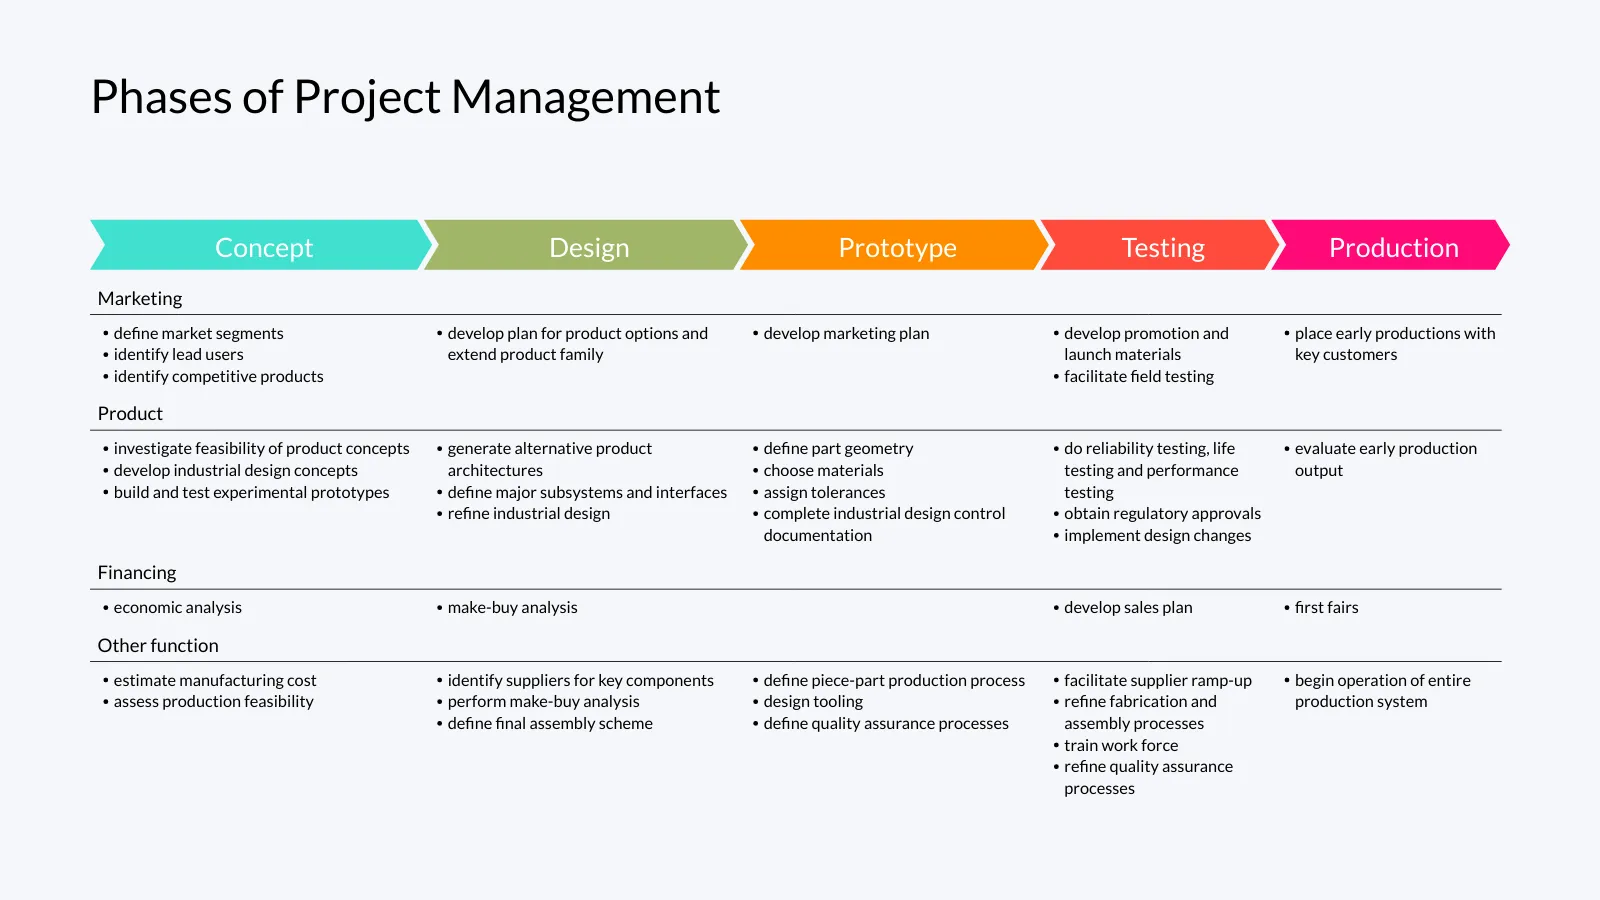 Project Phase Chart example: Phases of Project Management